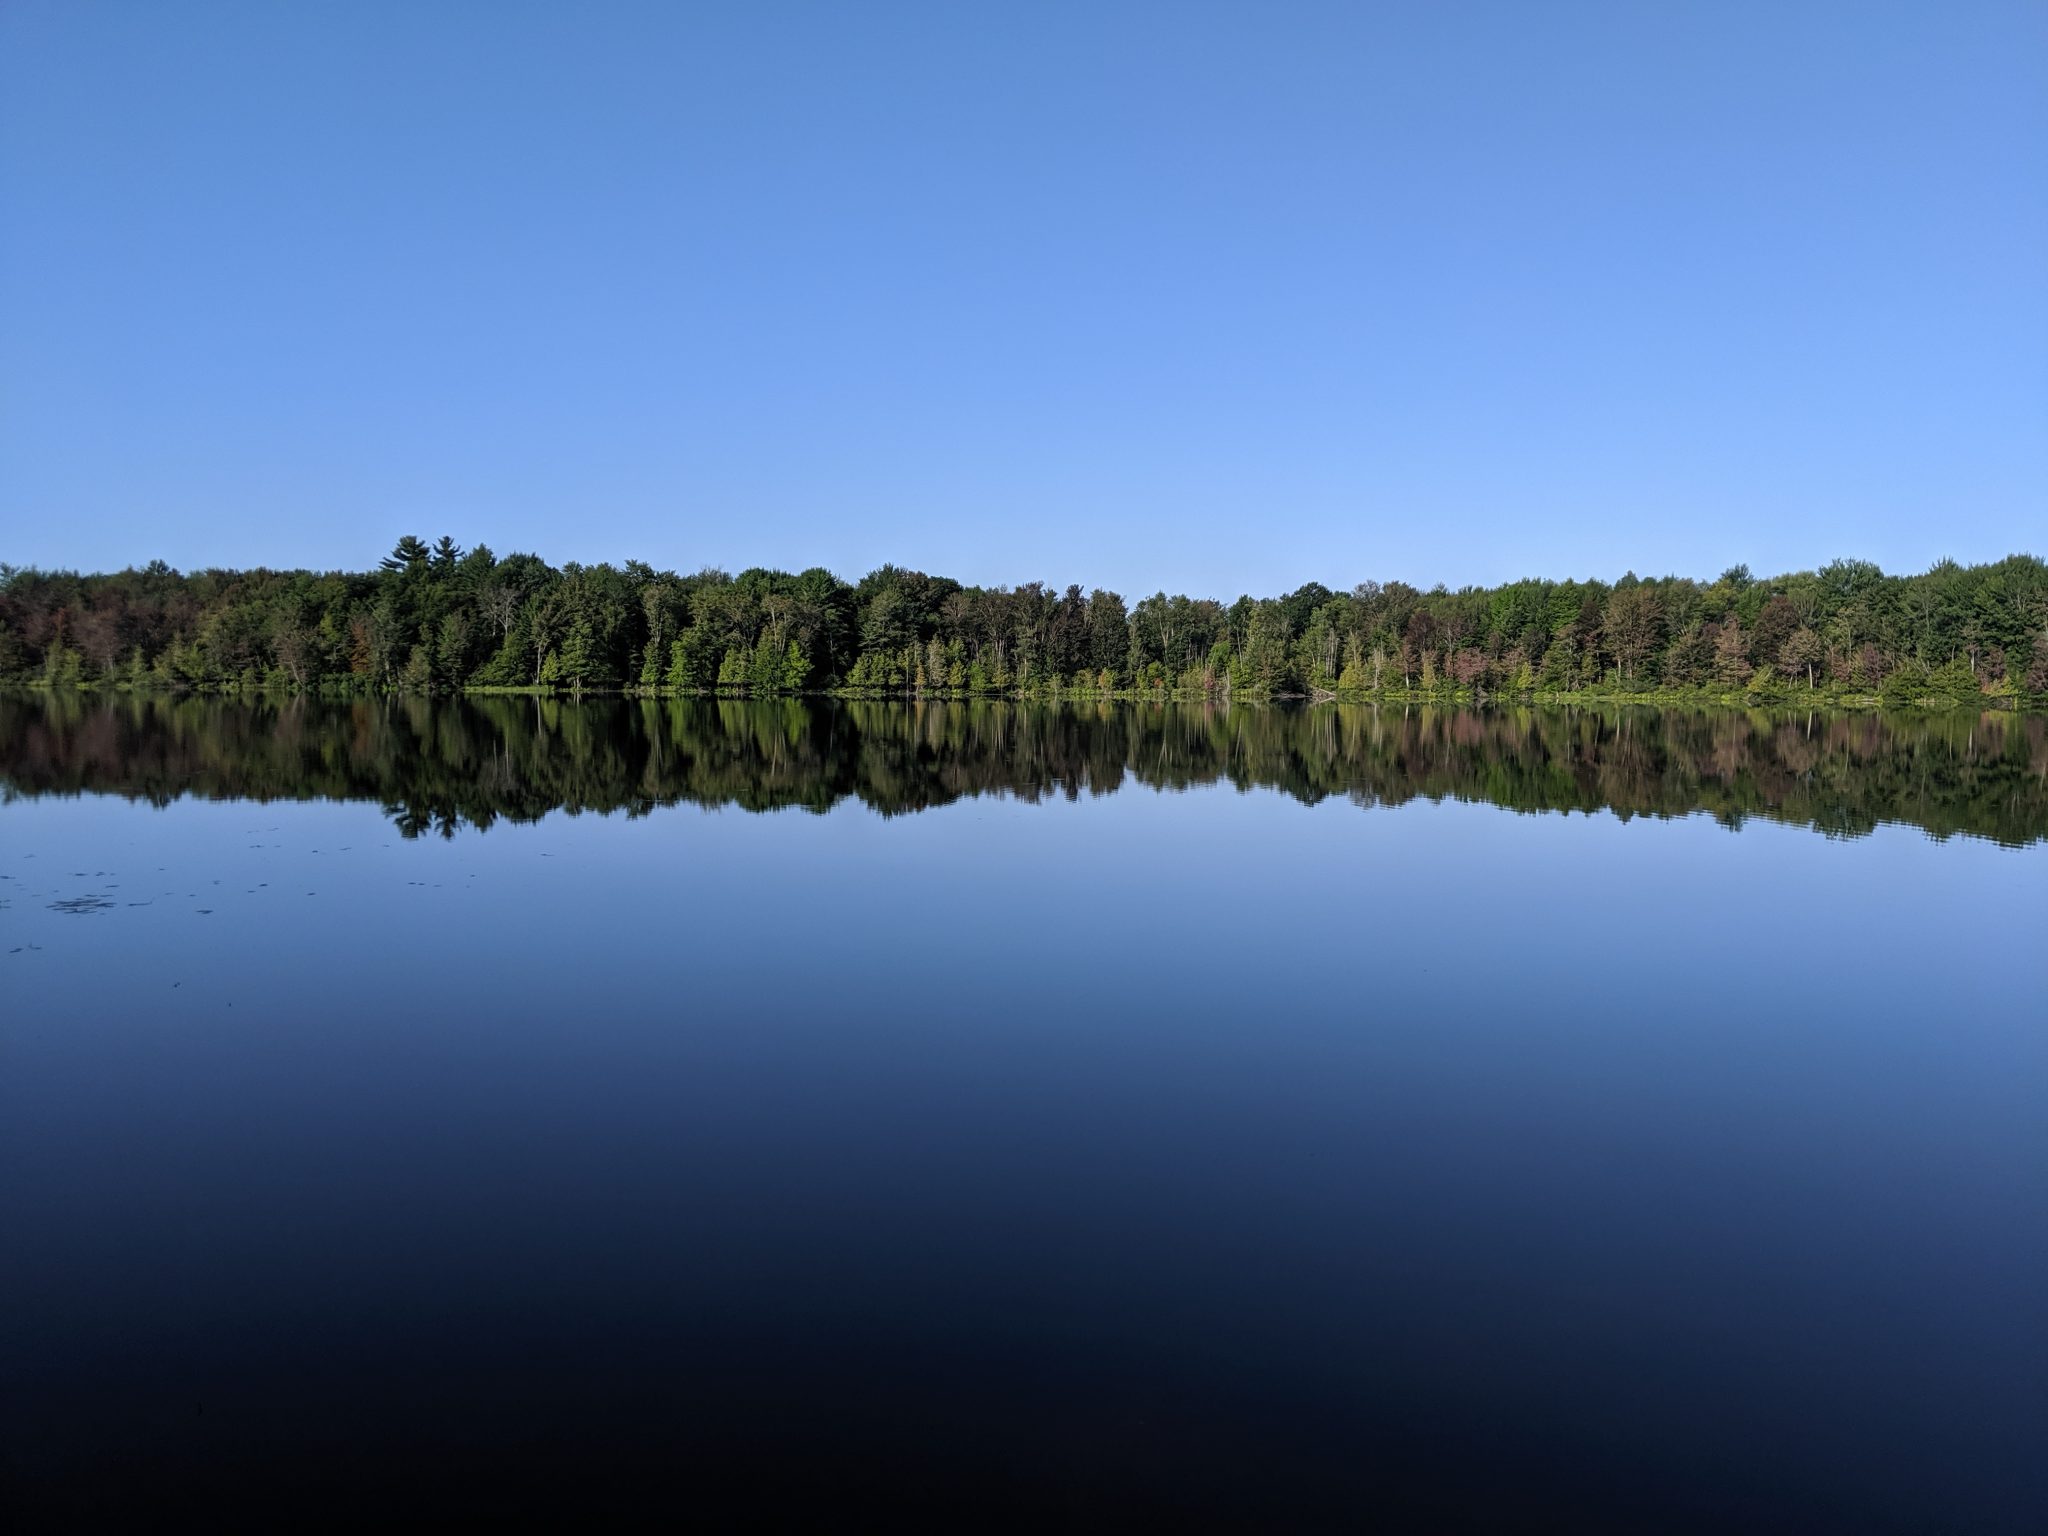 Sky and forest mirrored in a lake